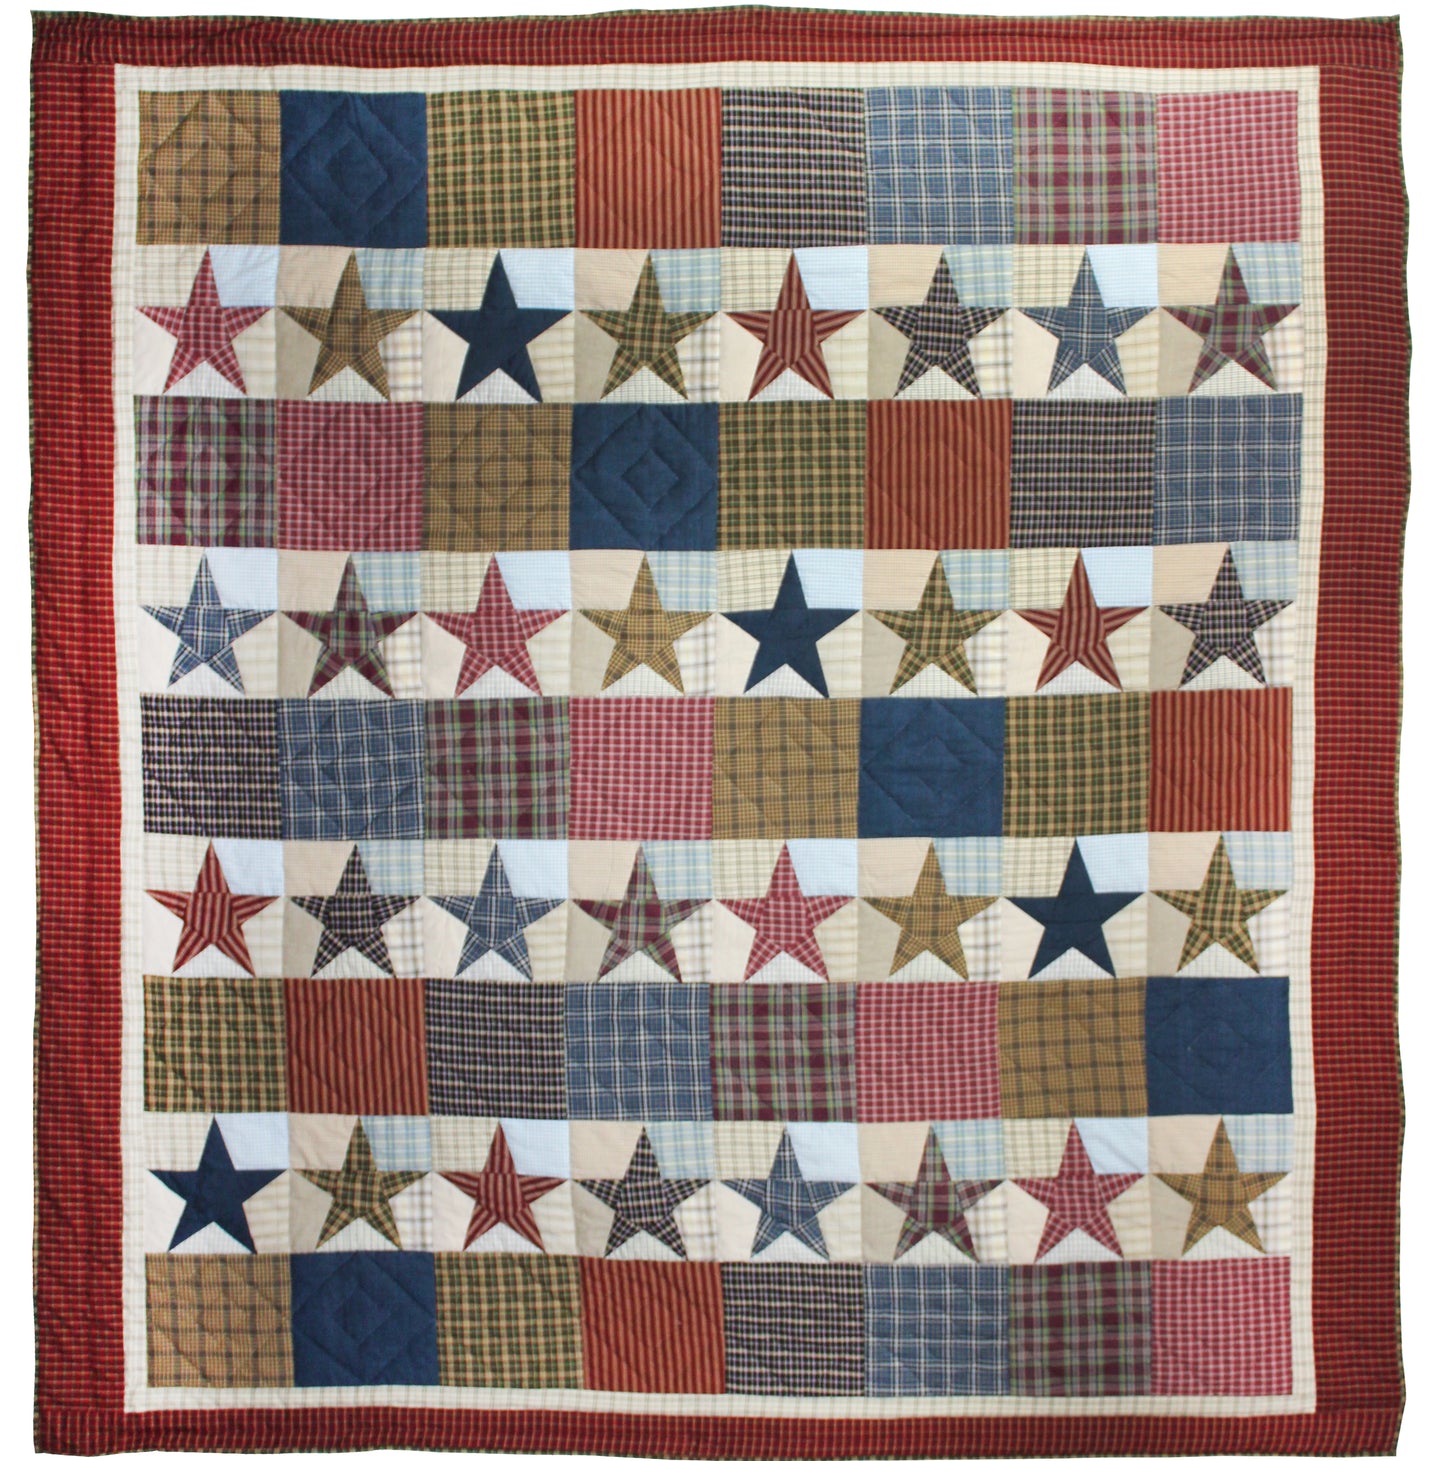 Stars and Squares Quilt, Hand cut and Patchwork cotton fabric blocks.